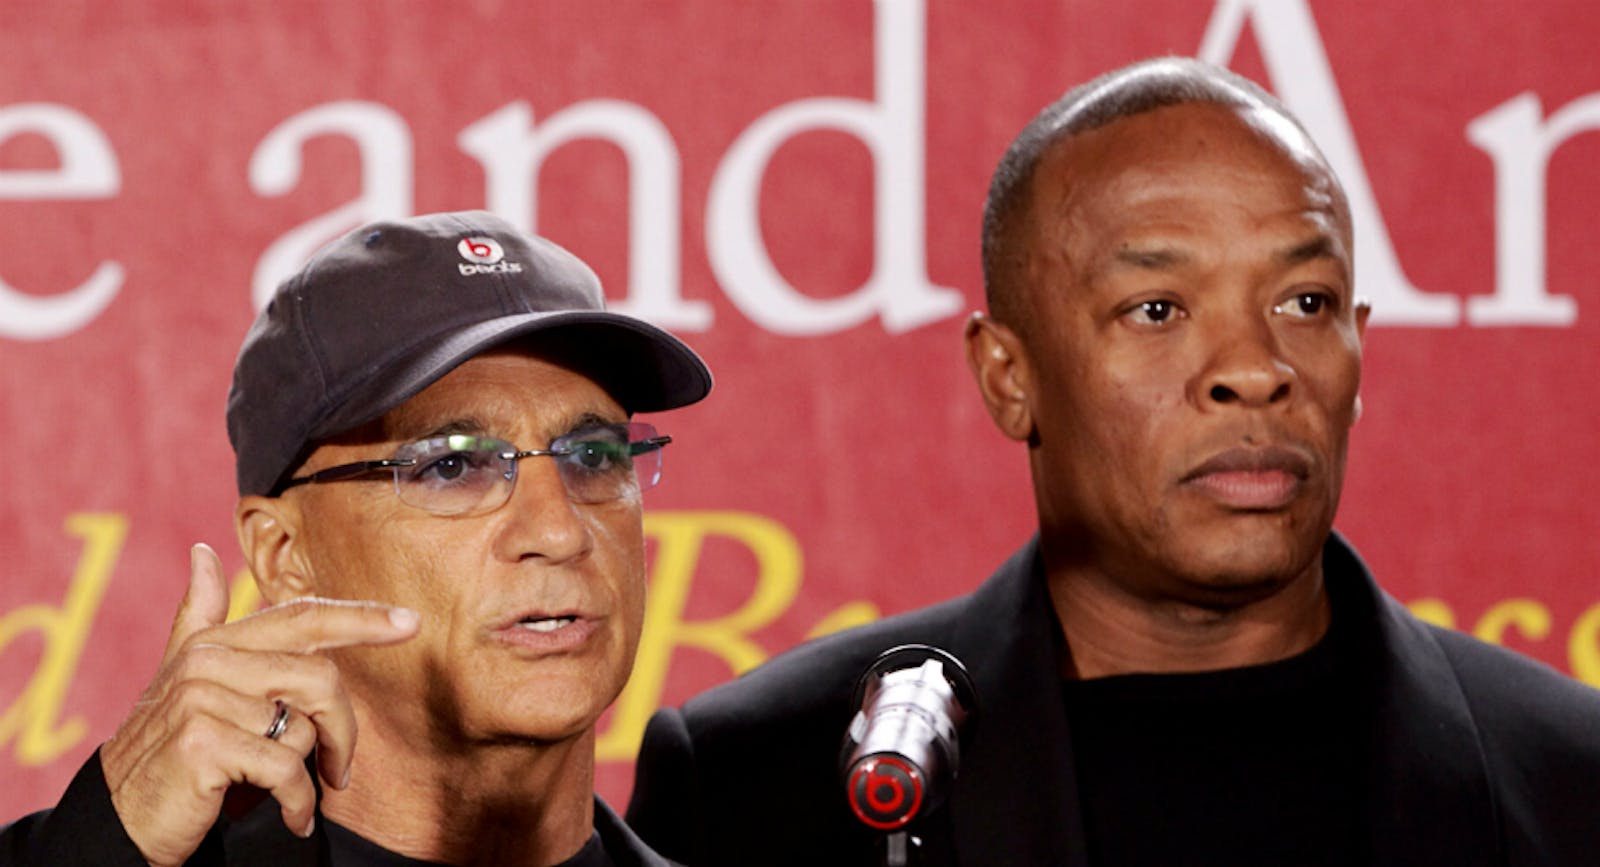 Jimmy Iovine and Dr. Dre. Photo by Associated Press.